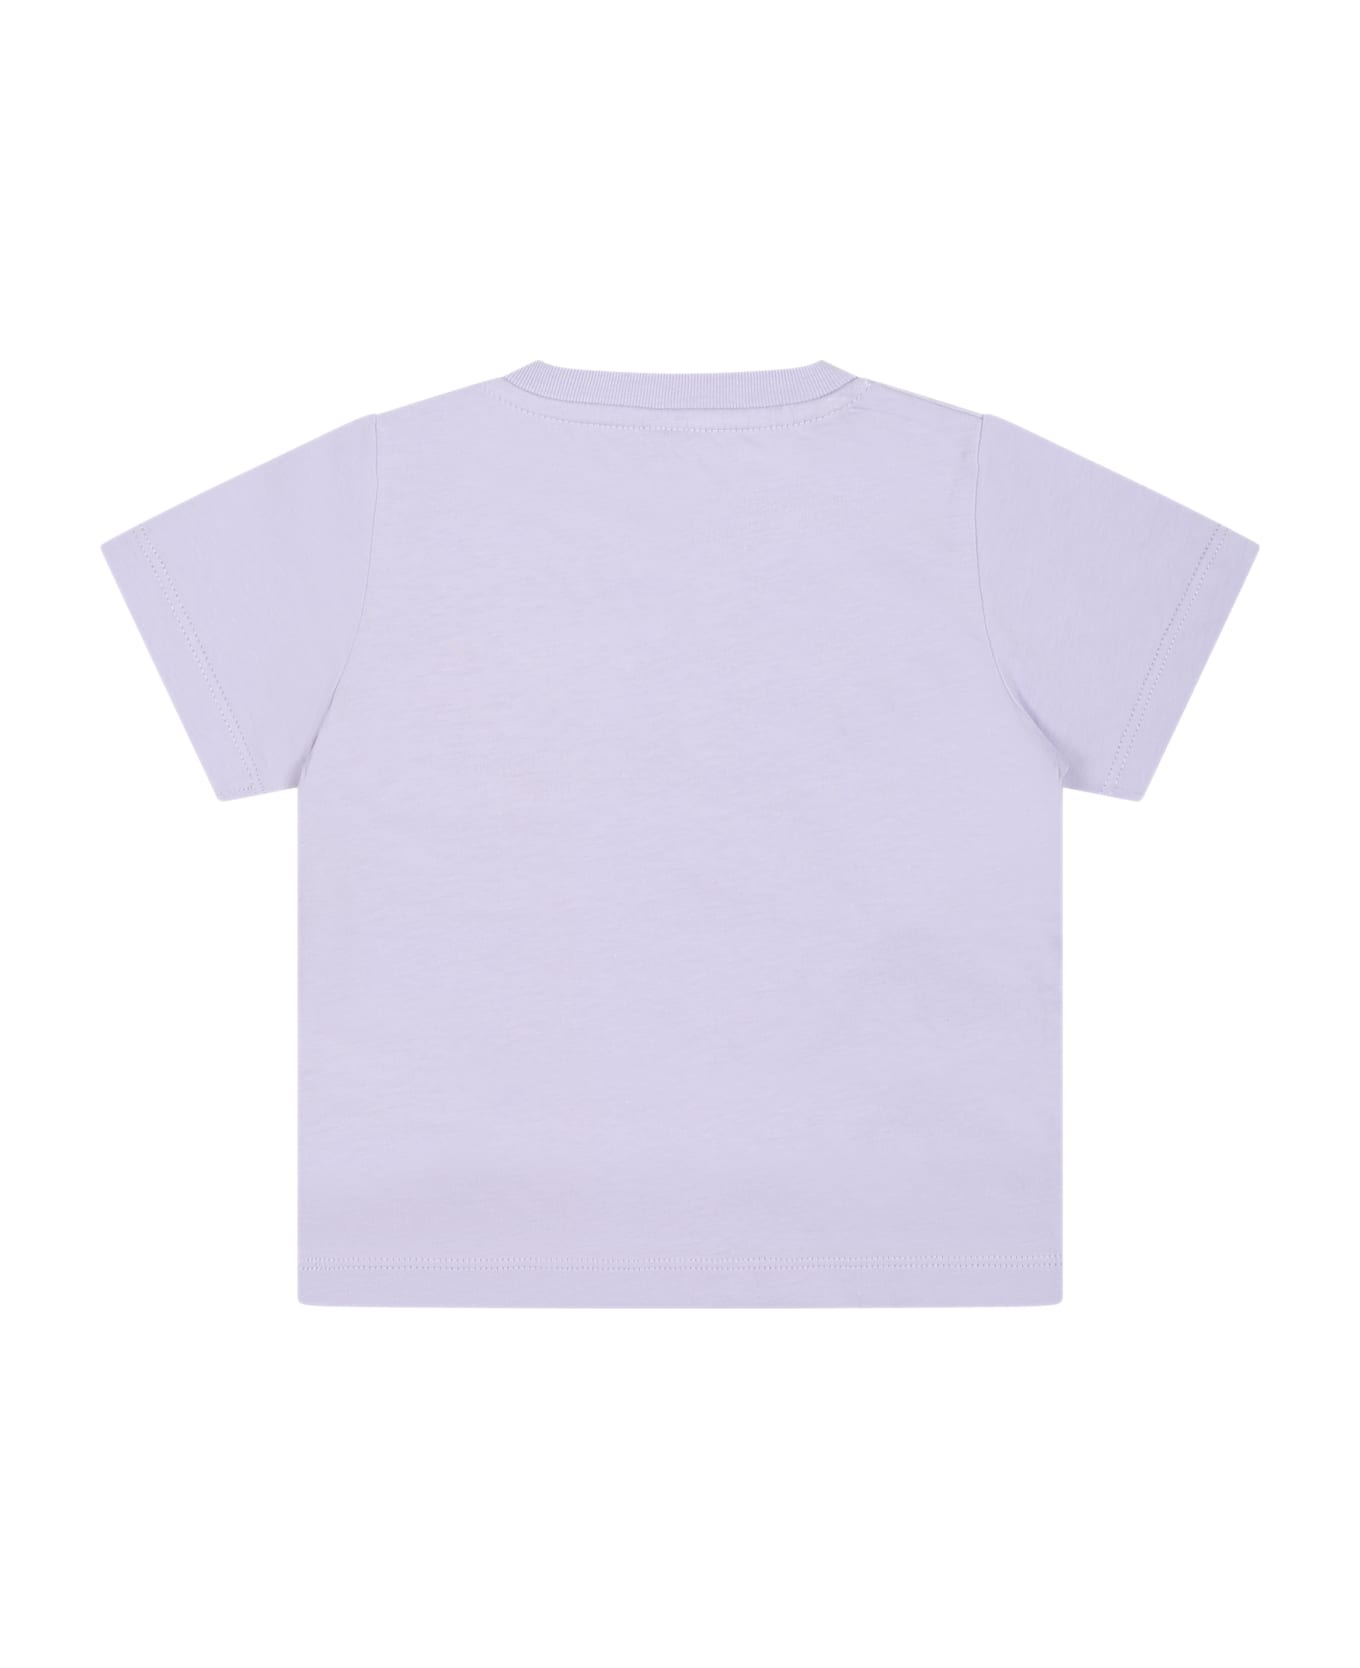 Stella McCartney Kids Purple T-shirt For Baby Girl With Little Animal - Violet